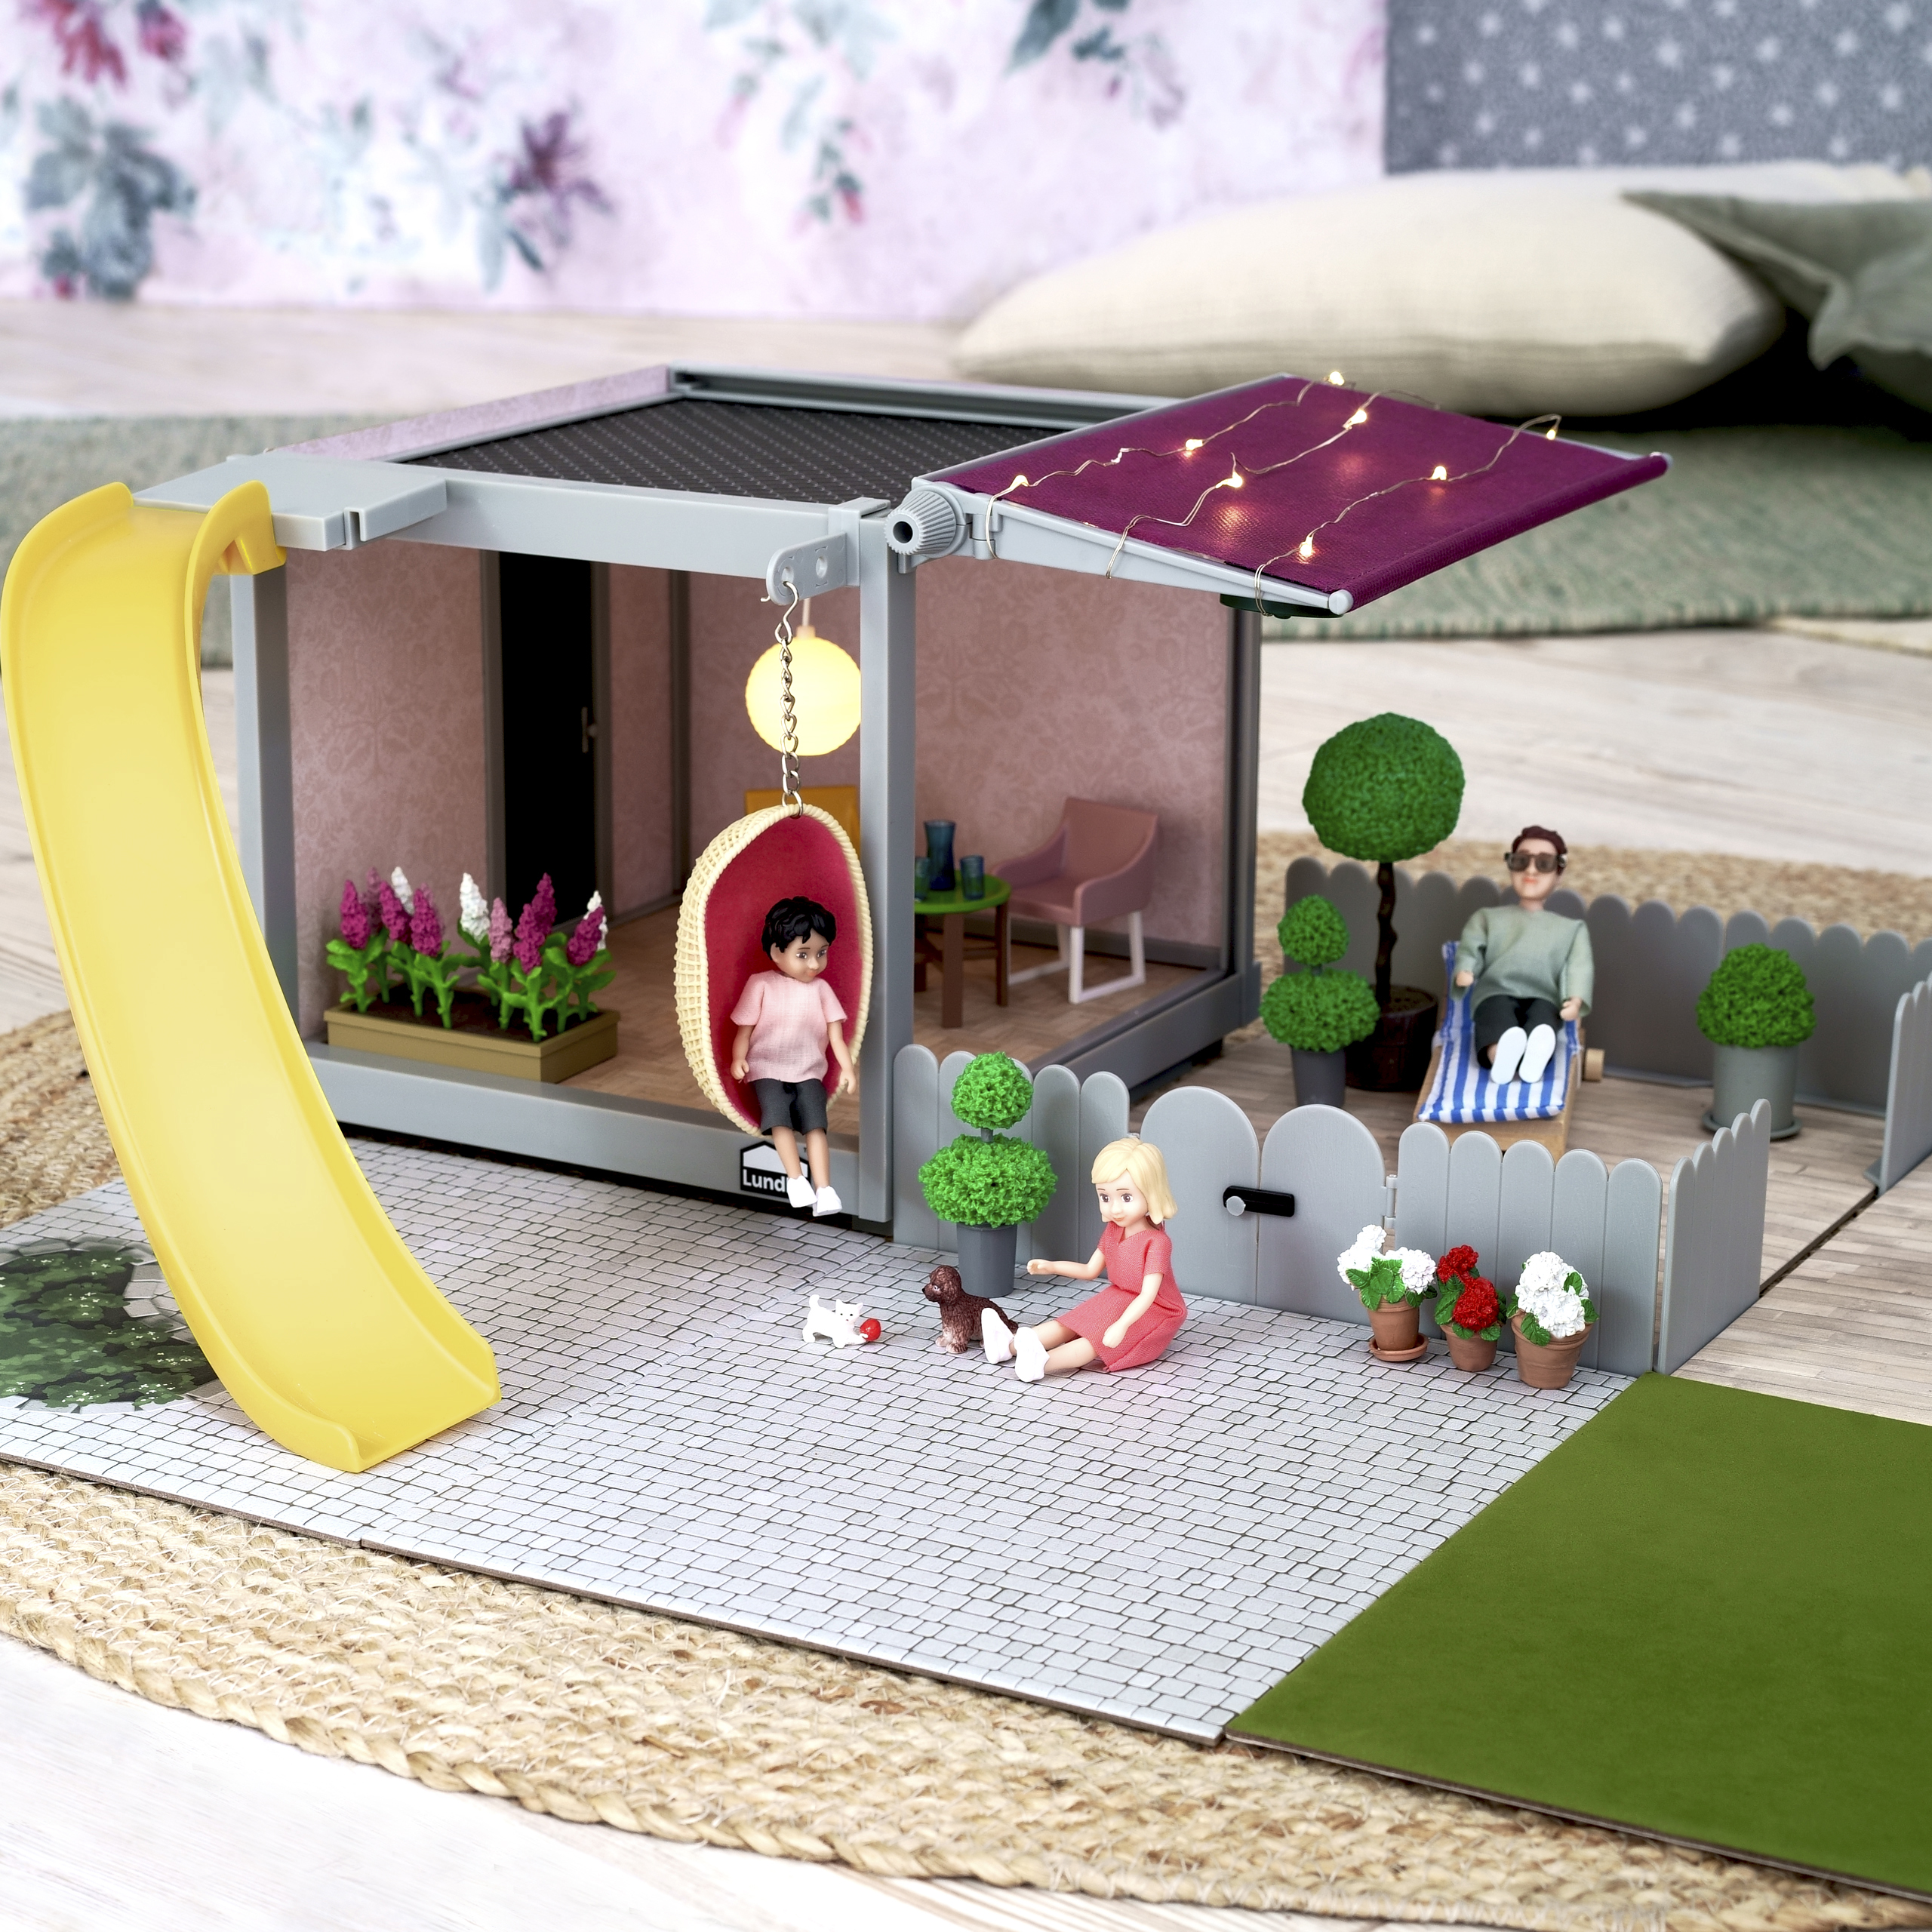 Doll house furniture & doll house accessories lundby doll house garden